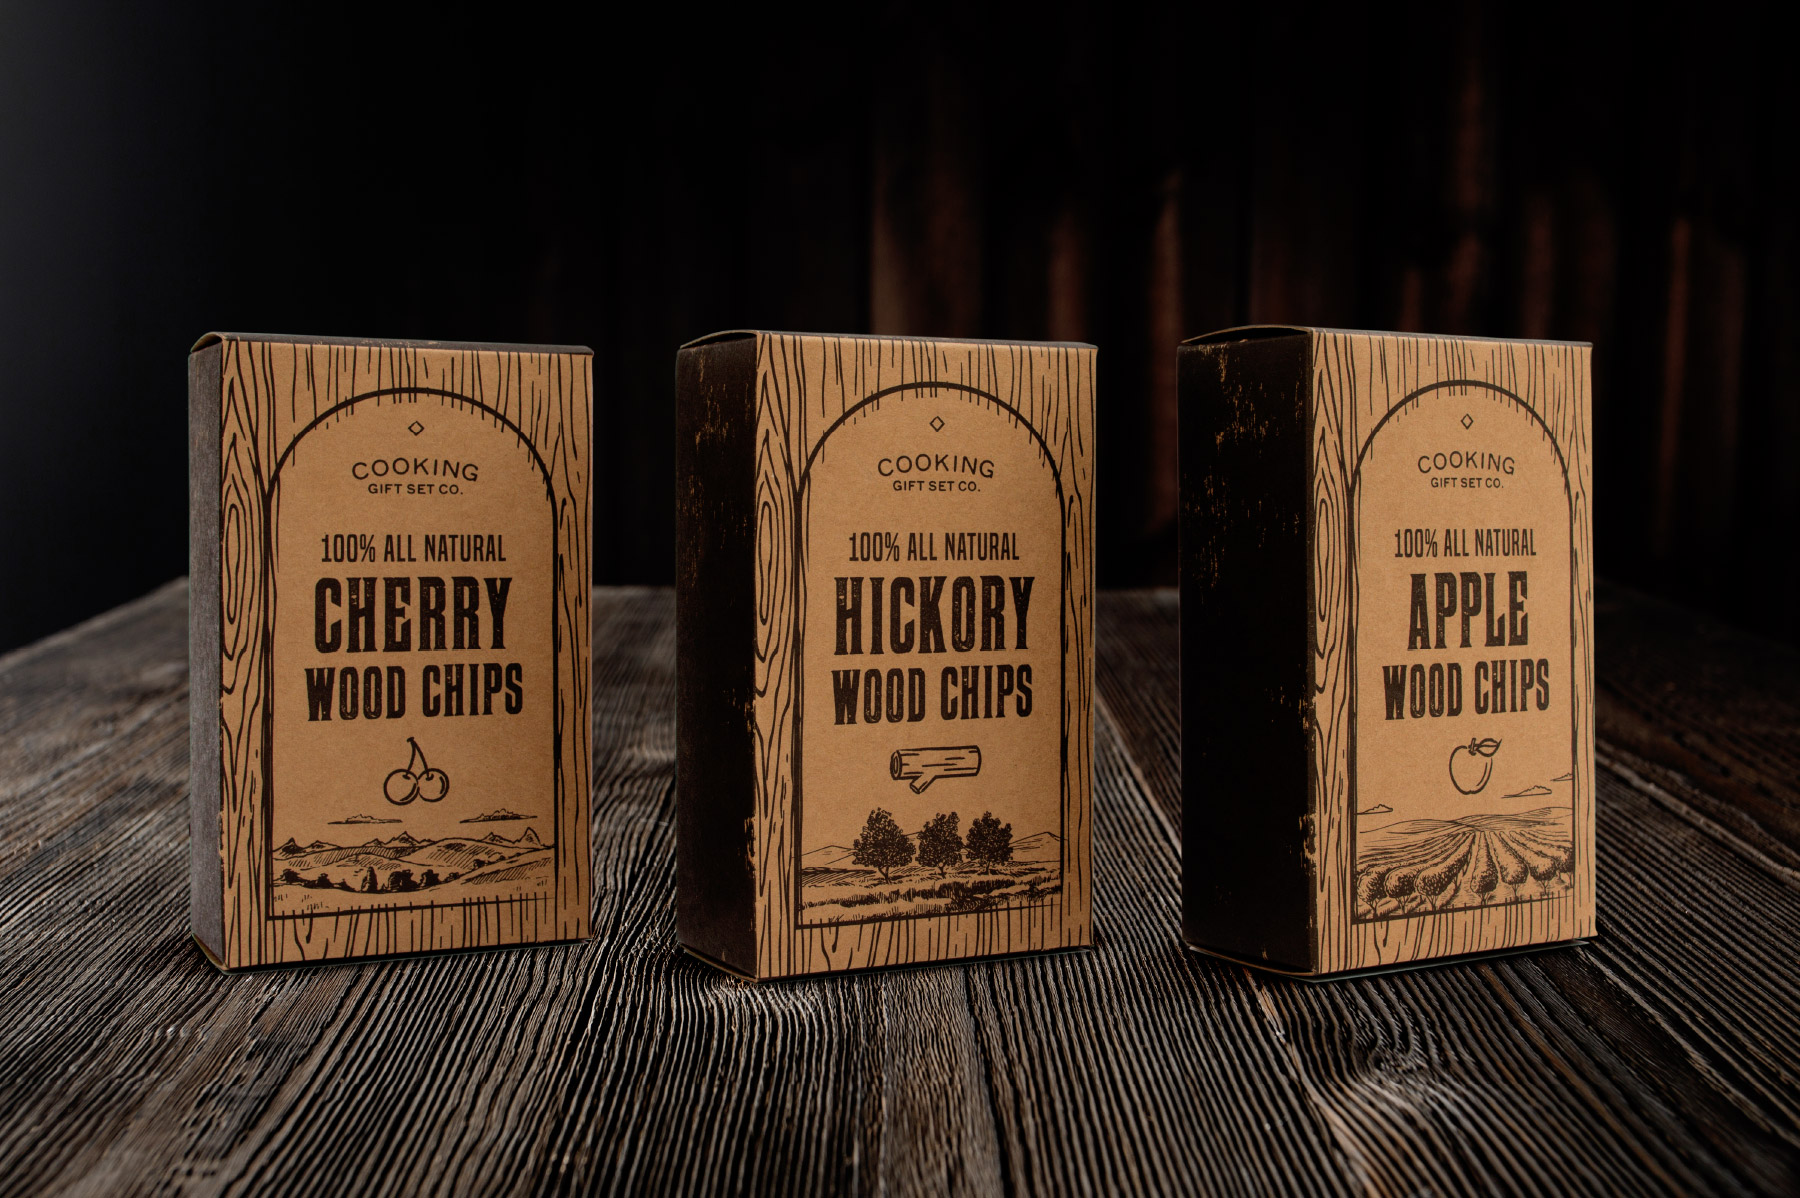 Cherry, Hickory, and Apple Wood Chips Box Design